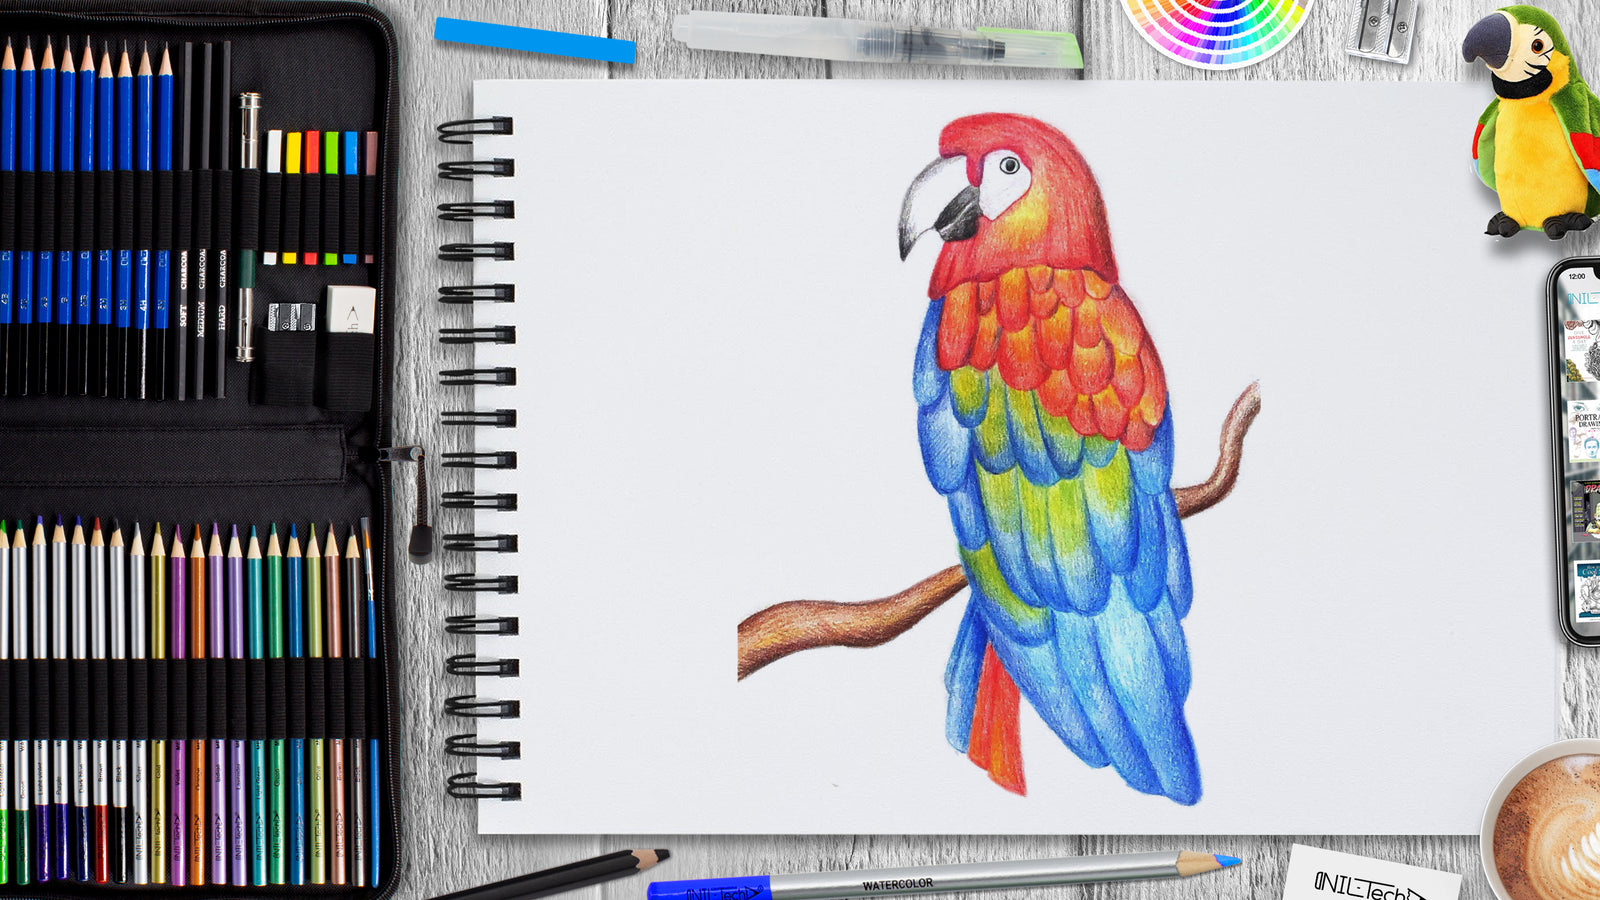 Parrot Drawing || How to Draw Parrot Step by Step || Bird Scenery Drawing  || Draw Parrot... - YouTube